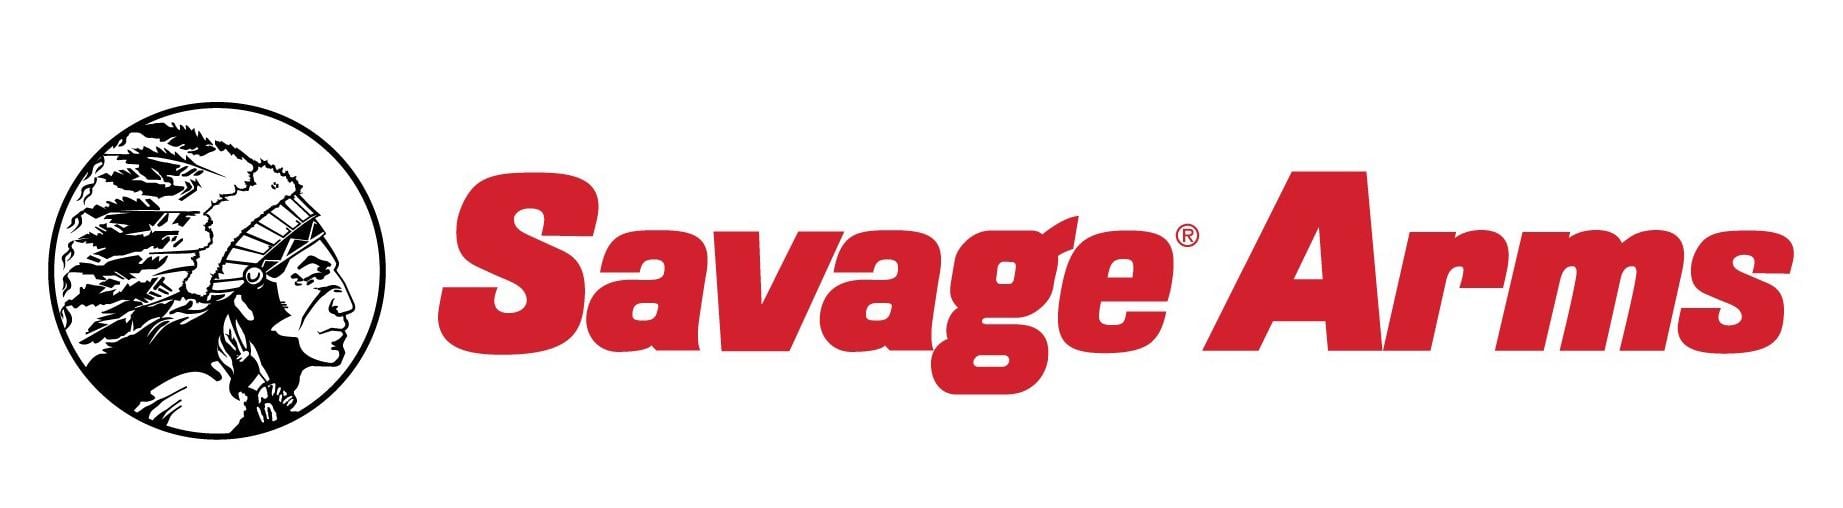 Savage Rifle Logo - Savage Arms Introduces the New Model 11 Scout Rifle - SHOT Business